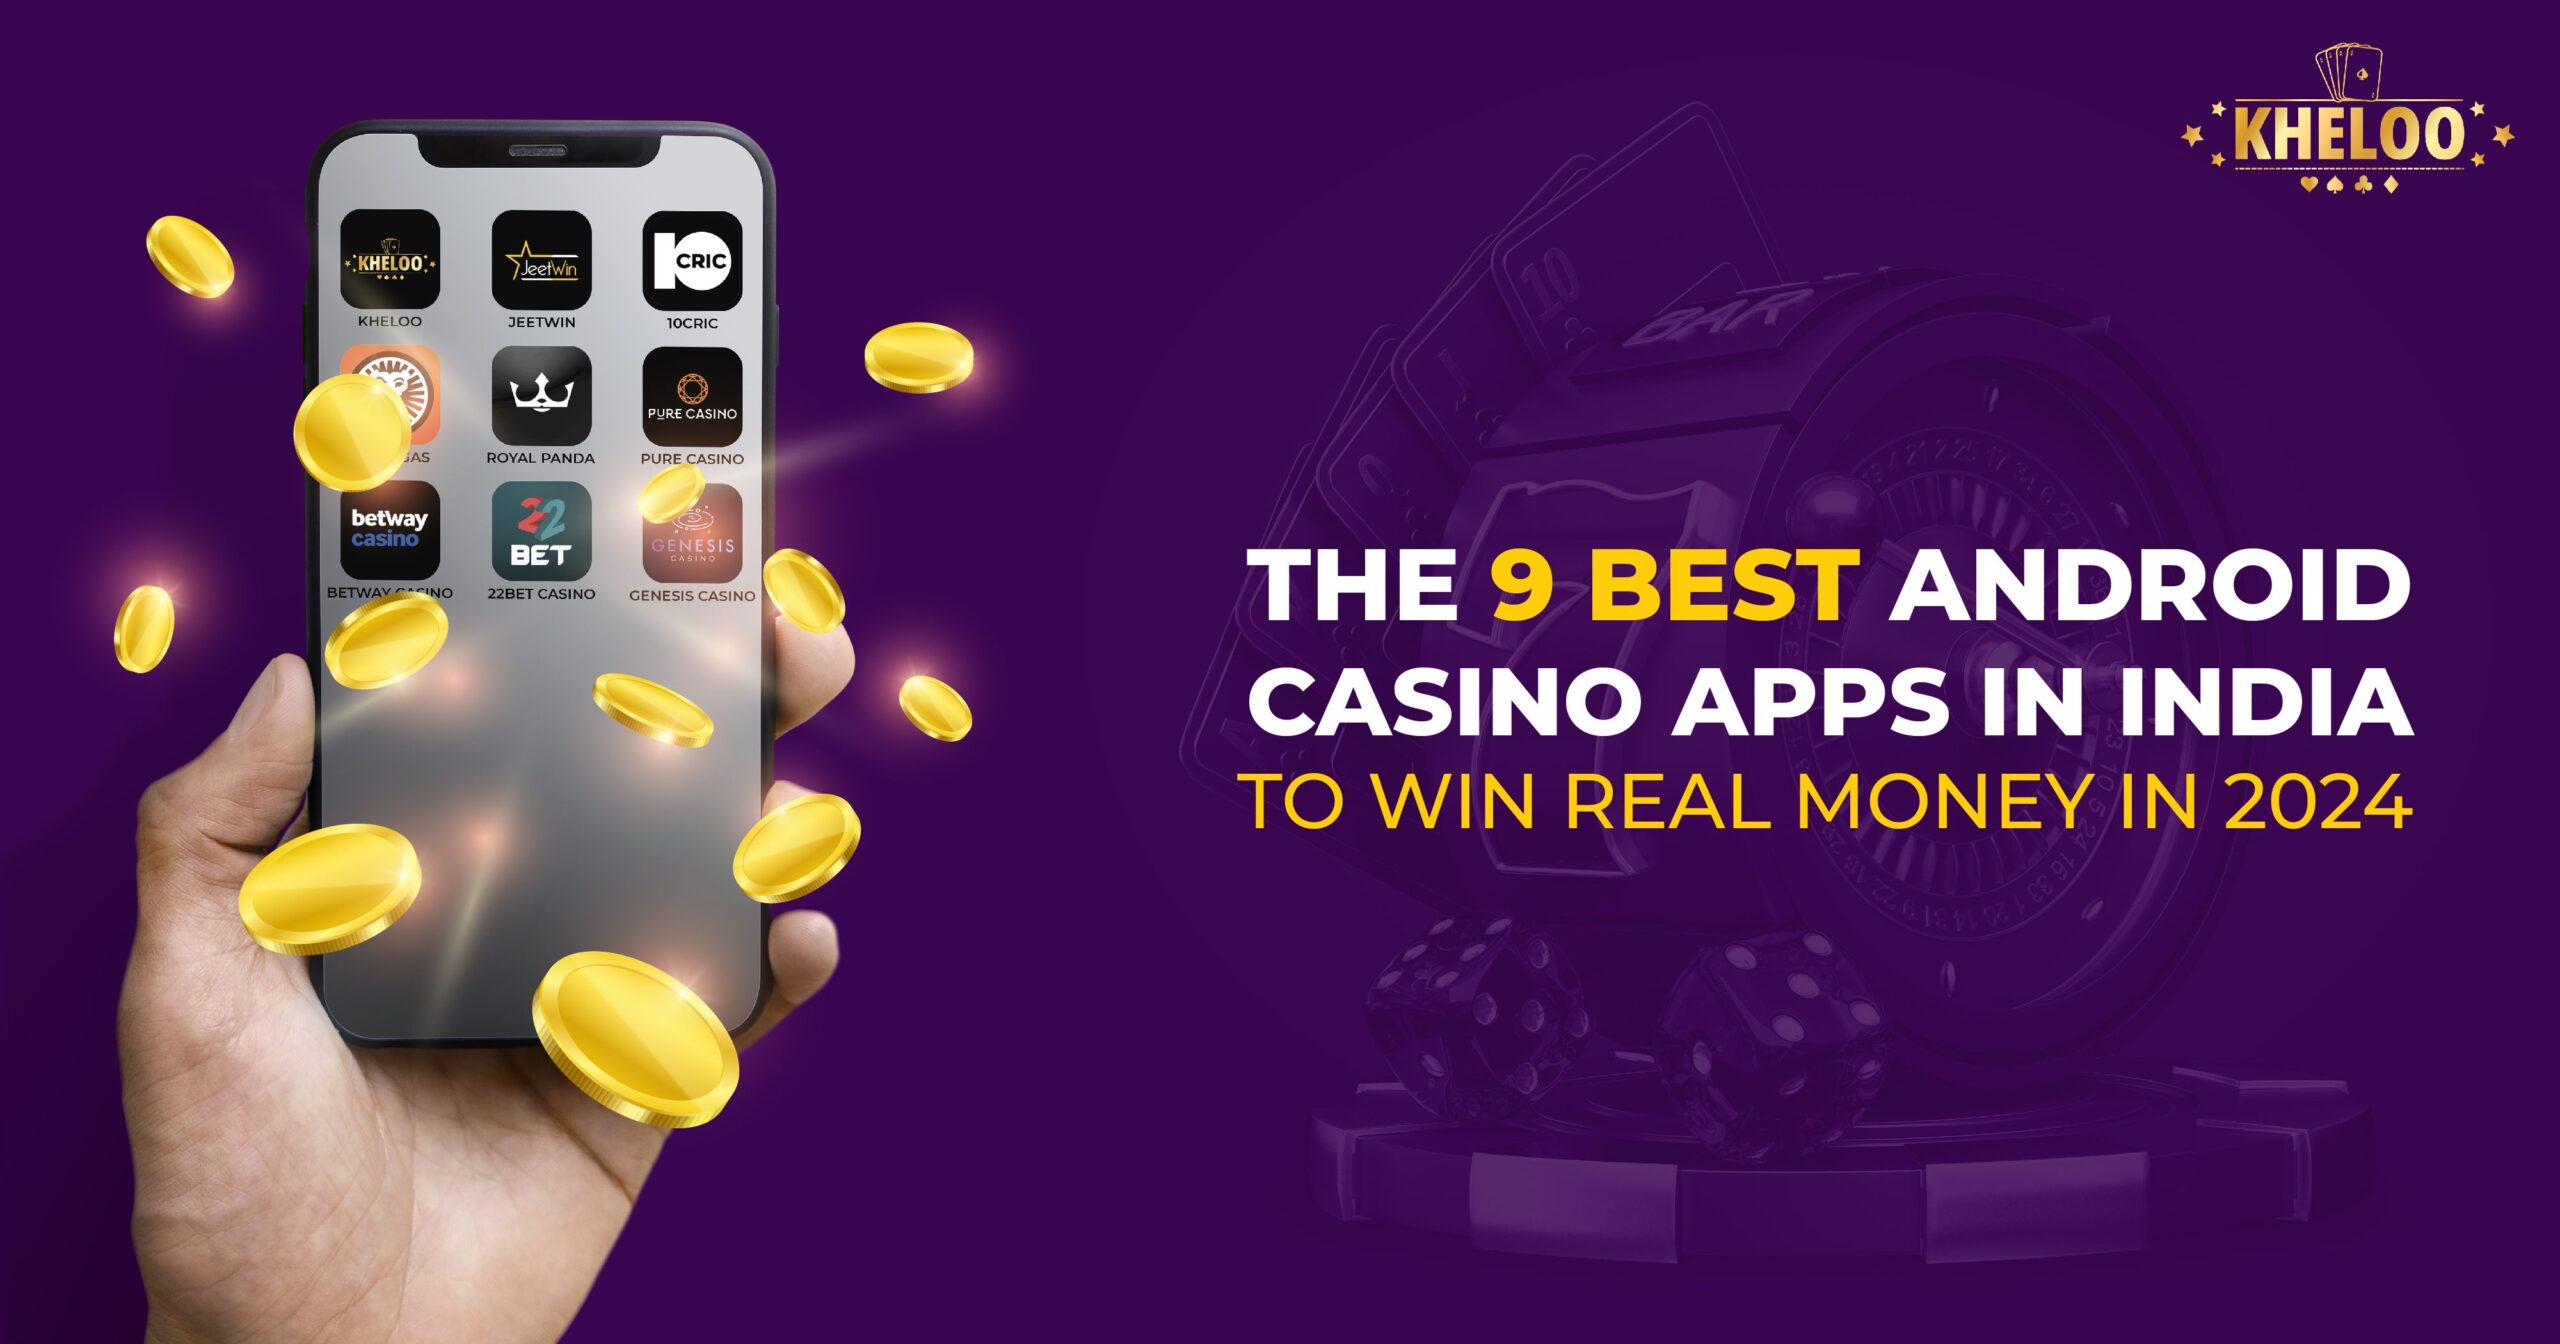 Top 20 Best Android Casino Apps in India to Win Real Money in 2024 - Kheloo